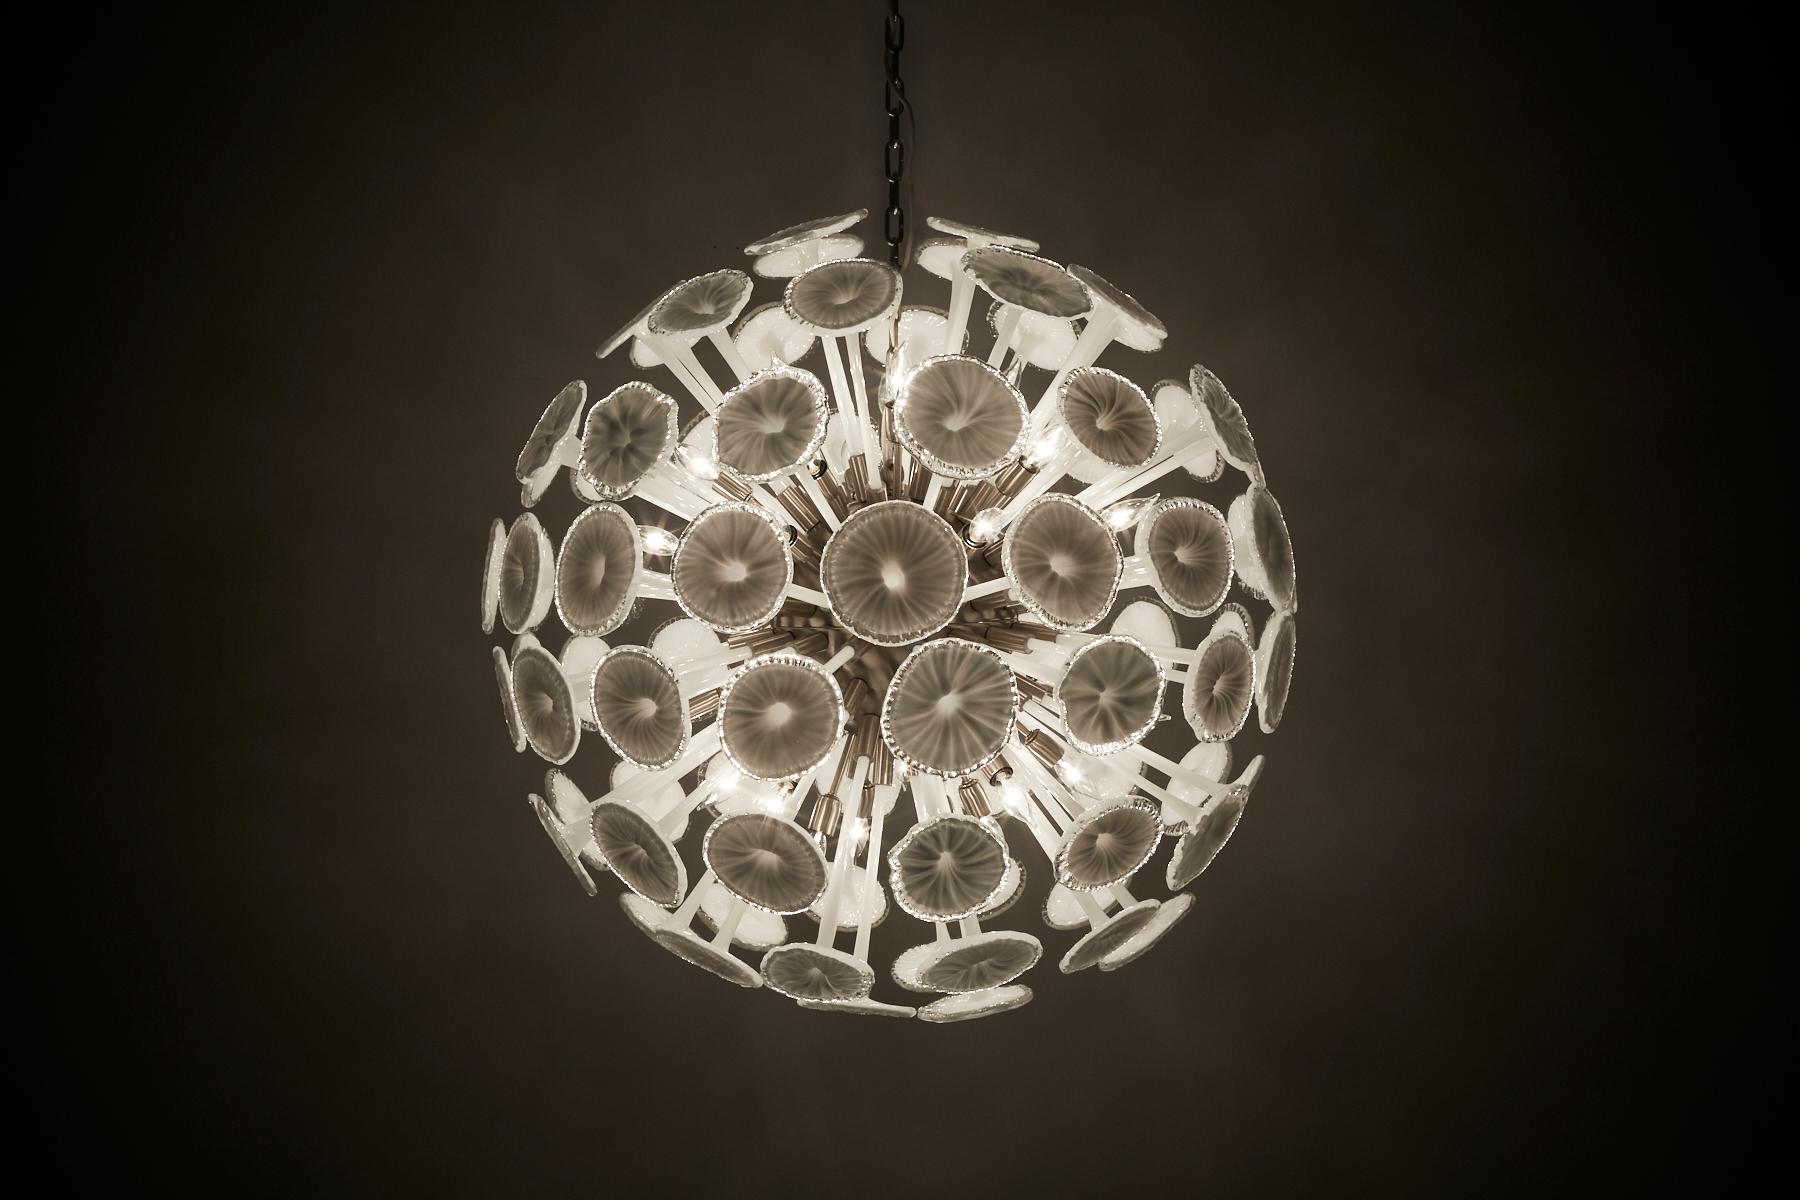 Large sputnik style chandelier by La Murrina. Large custom size at 39 in. diameter. Nickel central sphere and fittings. White and clear blown glass floral trumpets emanate from the central sphere.

No canopy or chain present.